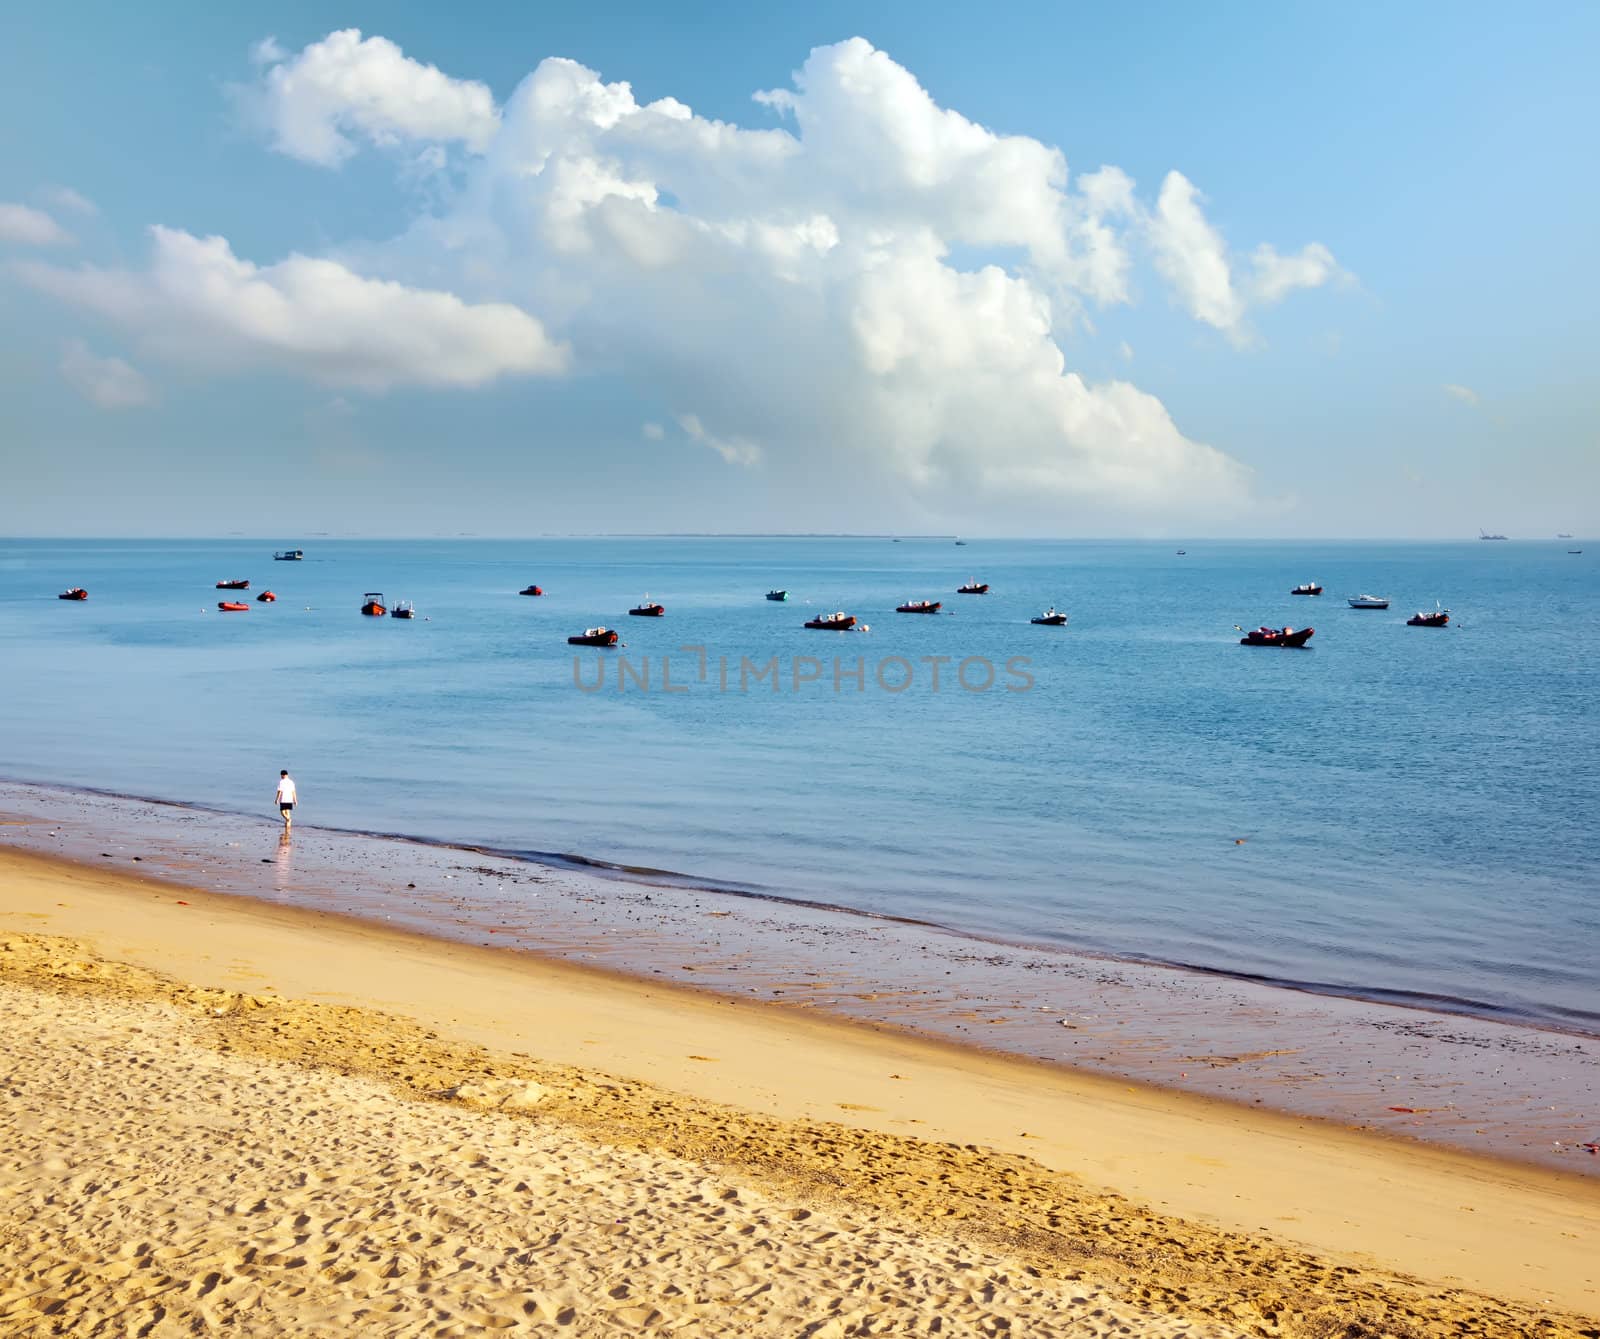 Boats moored in the bay - Taken in Hainan Island, China by xfdly5